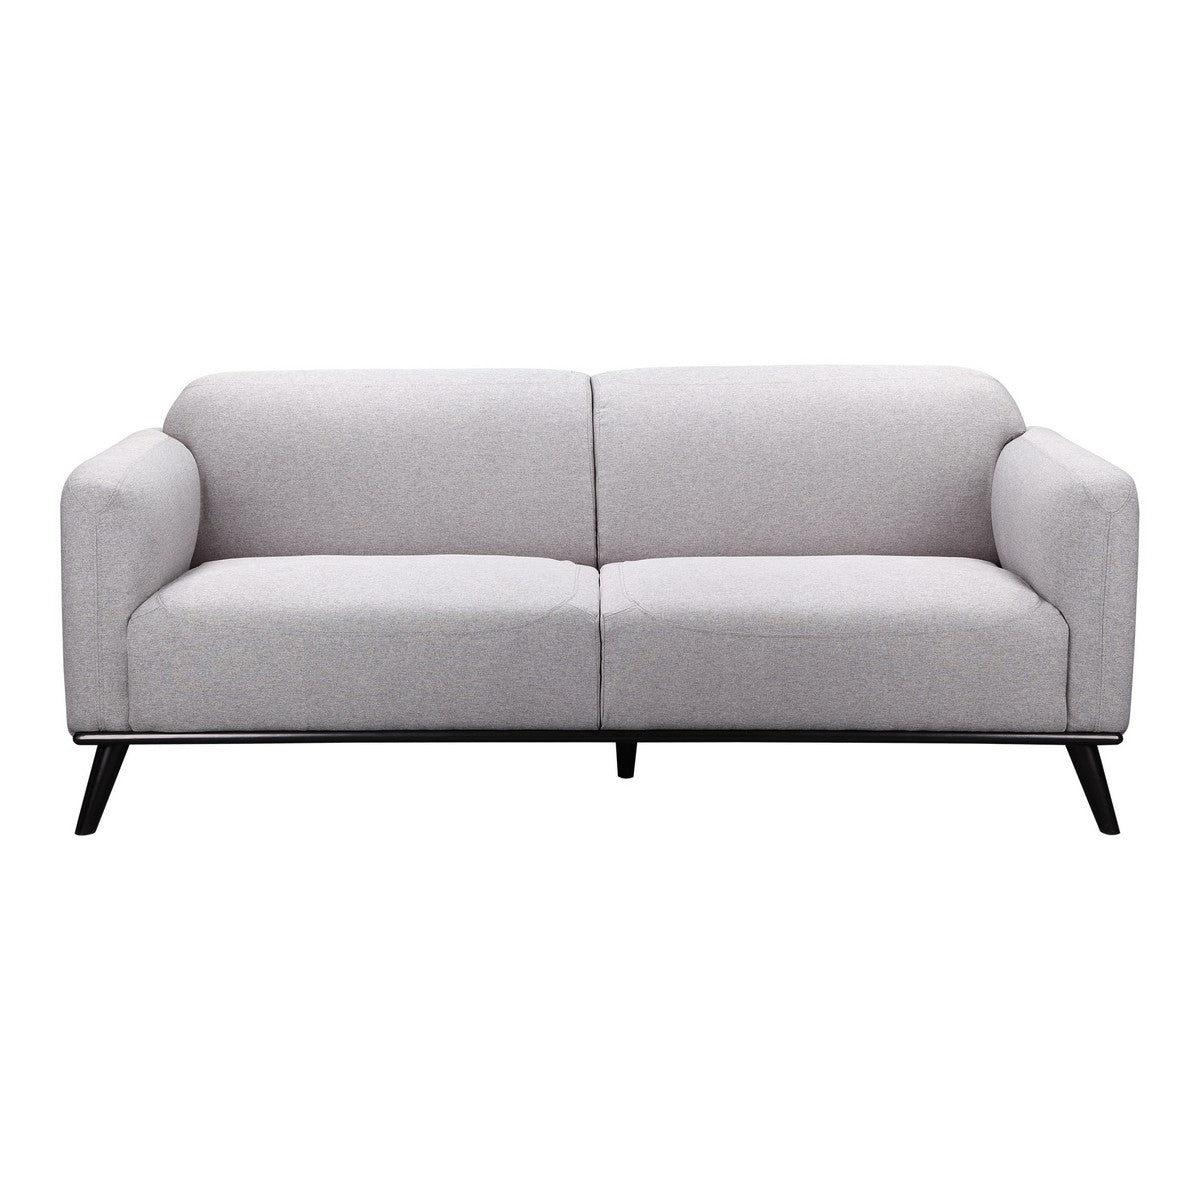 Moe's Home Collection Peppy Sofa Grey - FW-1006-15 - Moe's Home Collection - Sofas - Minimal And Modern - 1